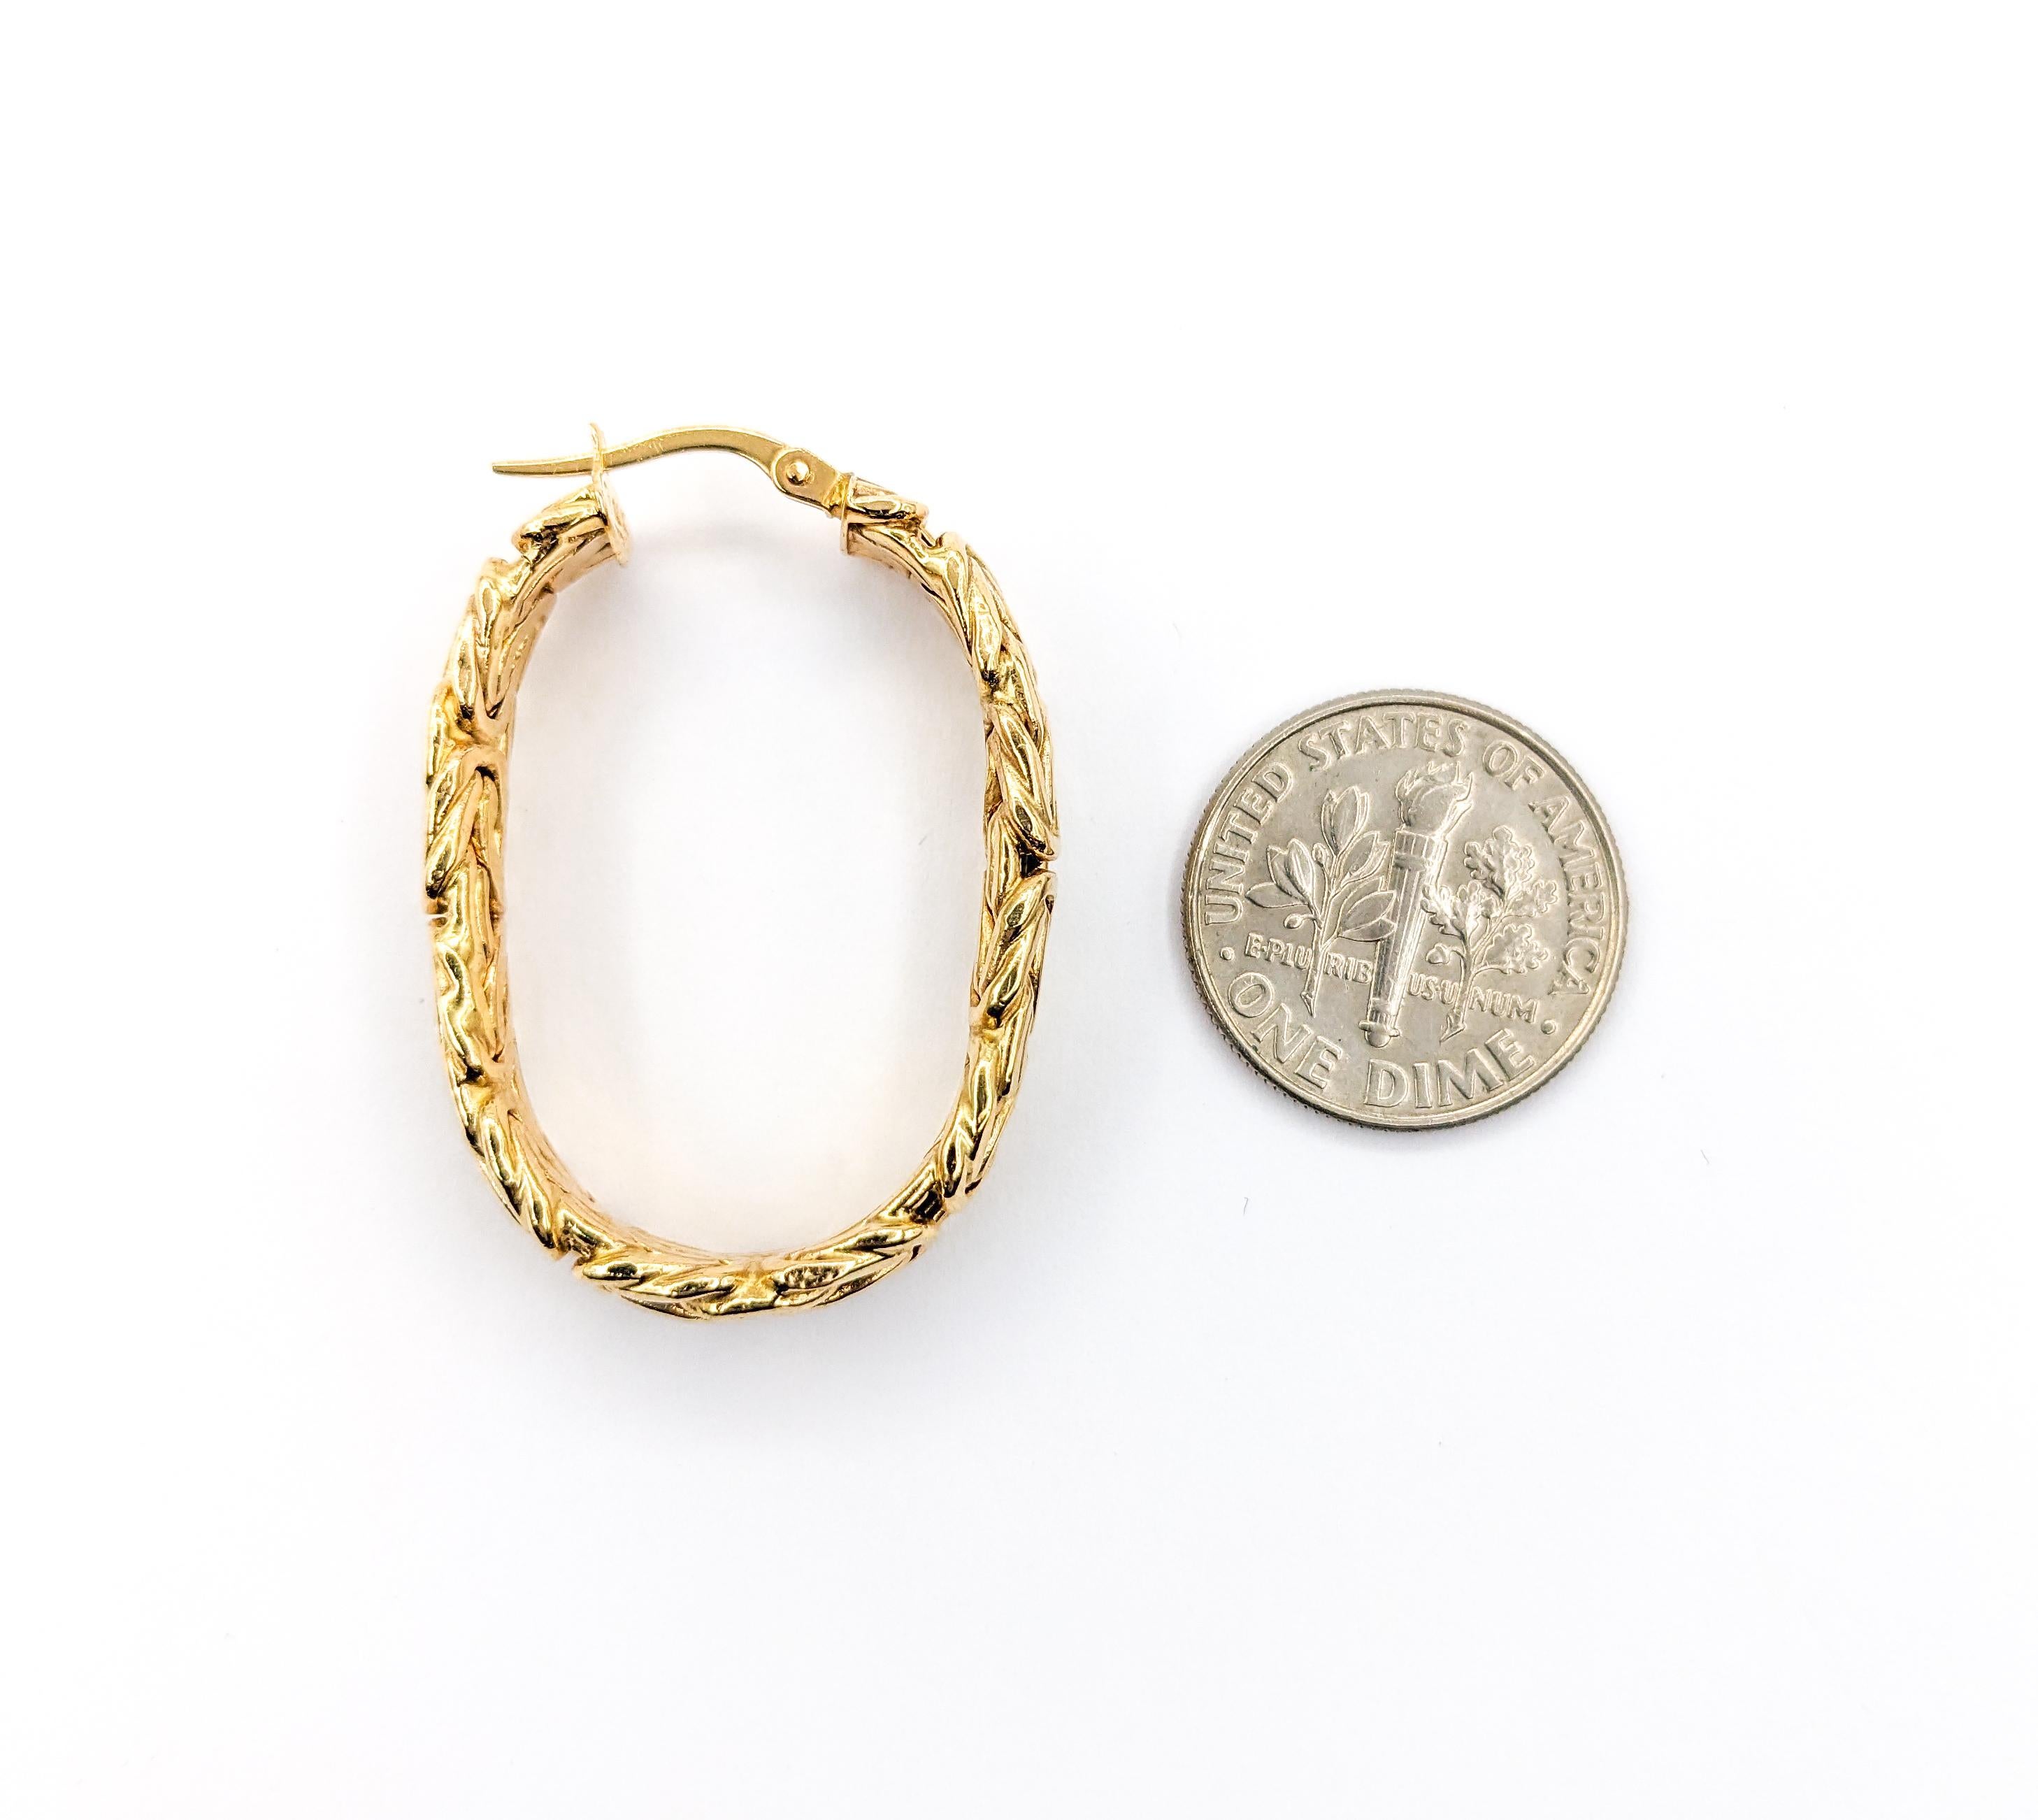 Flat Byzantine Hoop Earrings In Yellow Gold

Introducing these stunning Flat Byzantine Hoop Earrings, exquisitely crafted in 14kt yellow gold. These earrings showcase the intricate and timeless Byzantine design, known for its textured and detailed